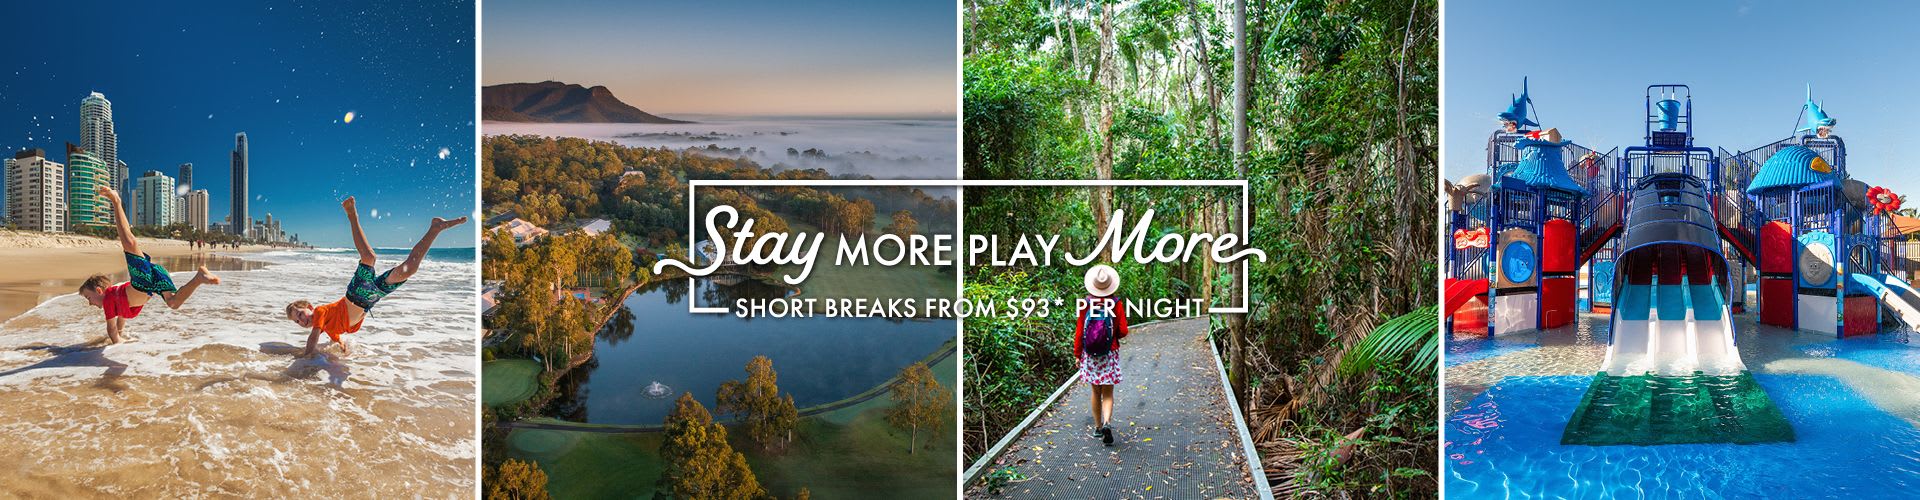 Oaks Stay more play more QLD and NSW accomodation offer Banner